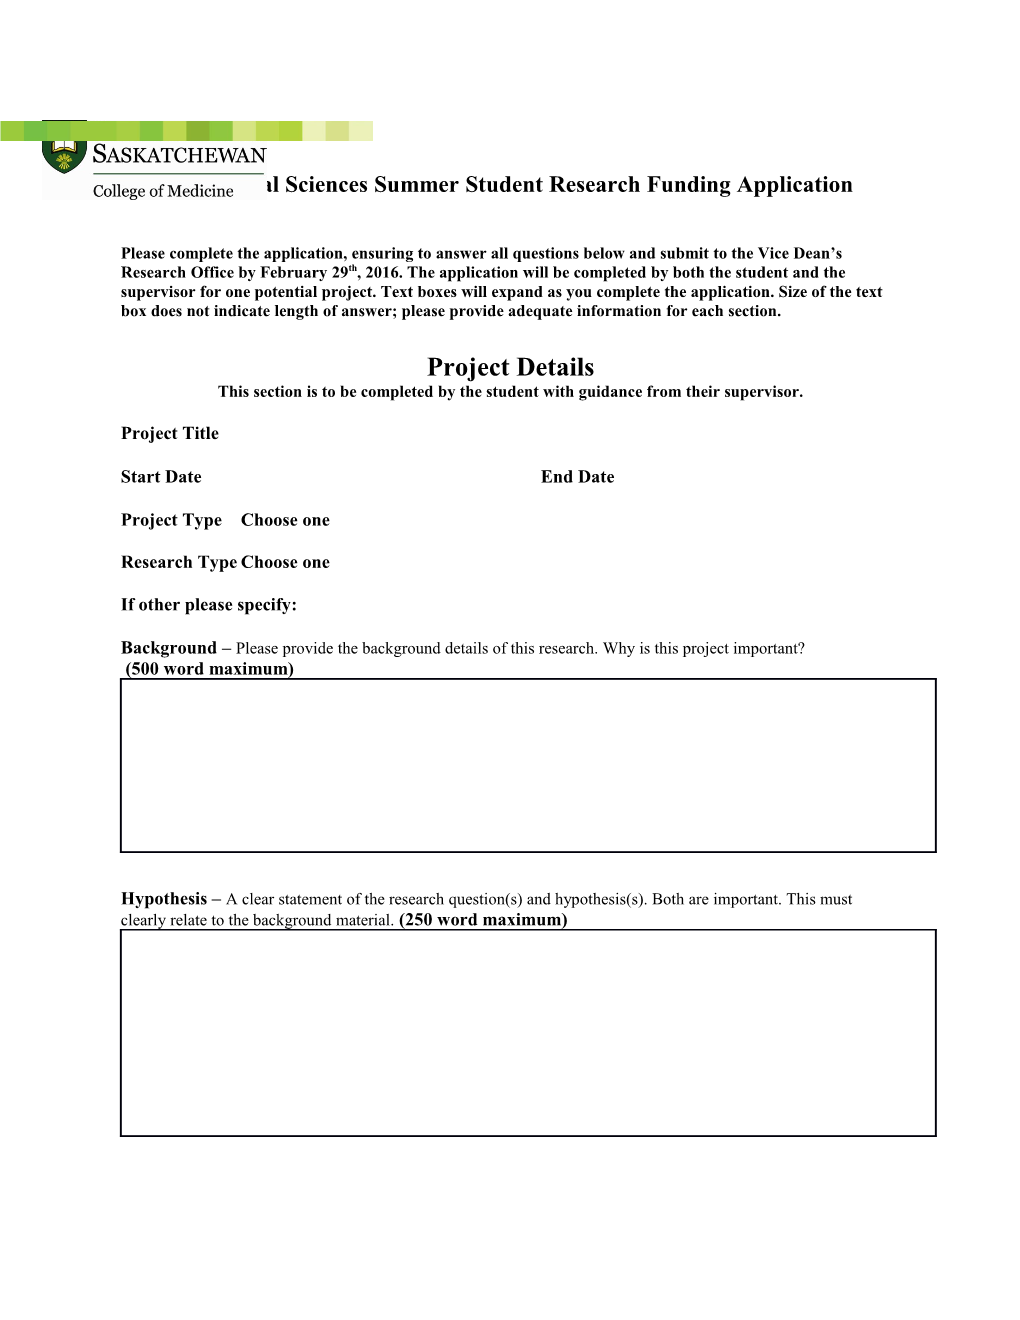 Biomedical Sciences Summer Student Research Funding Application